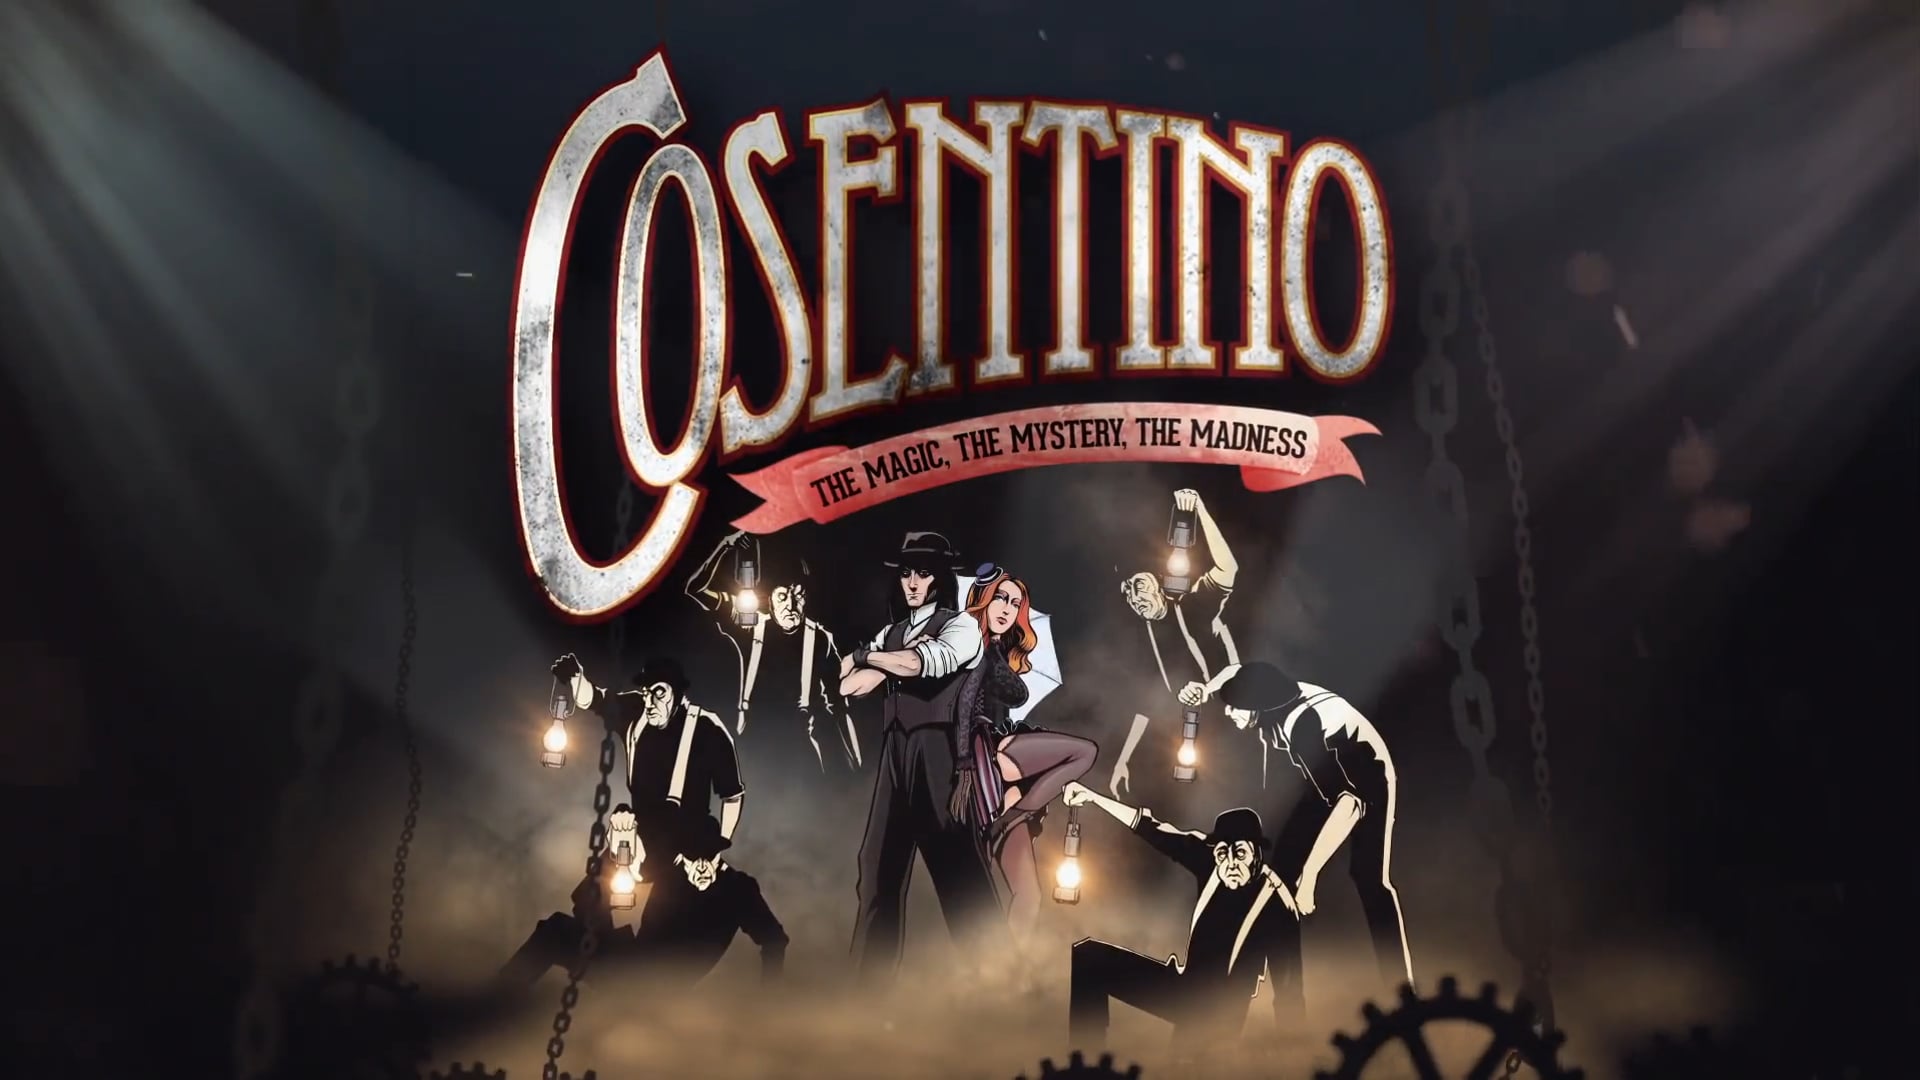 Cosentino - The Magic, The Mystery, The Madness